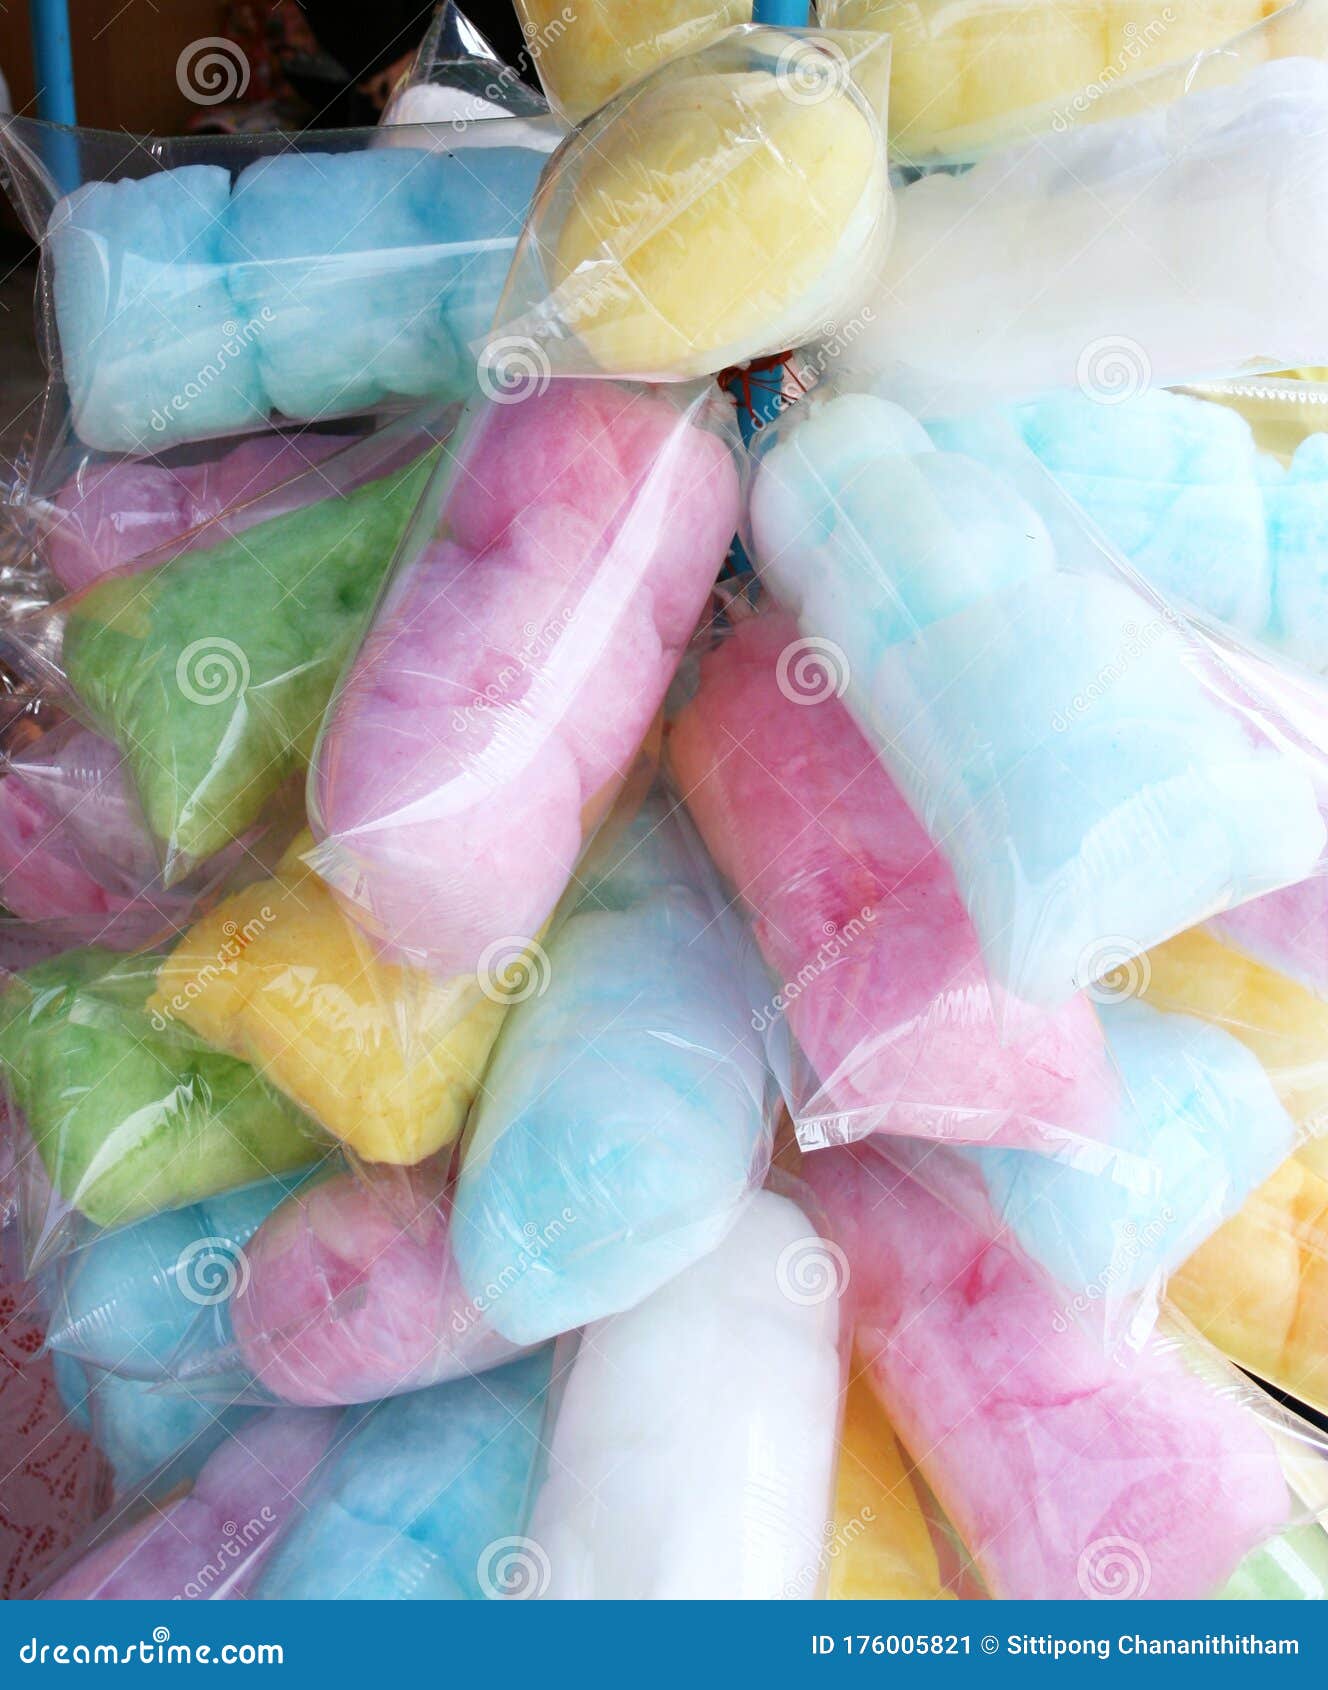 Rainbow Colors Cotton Candy Stock Image - Image of beautiful, colorful ...